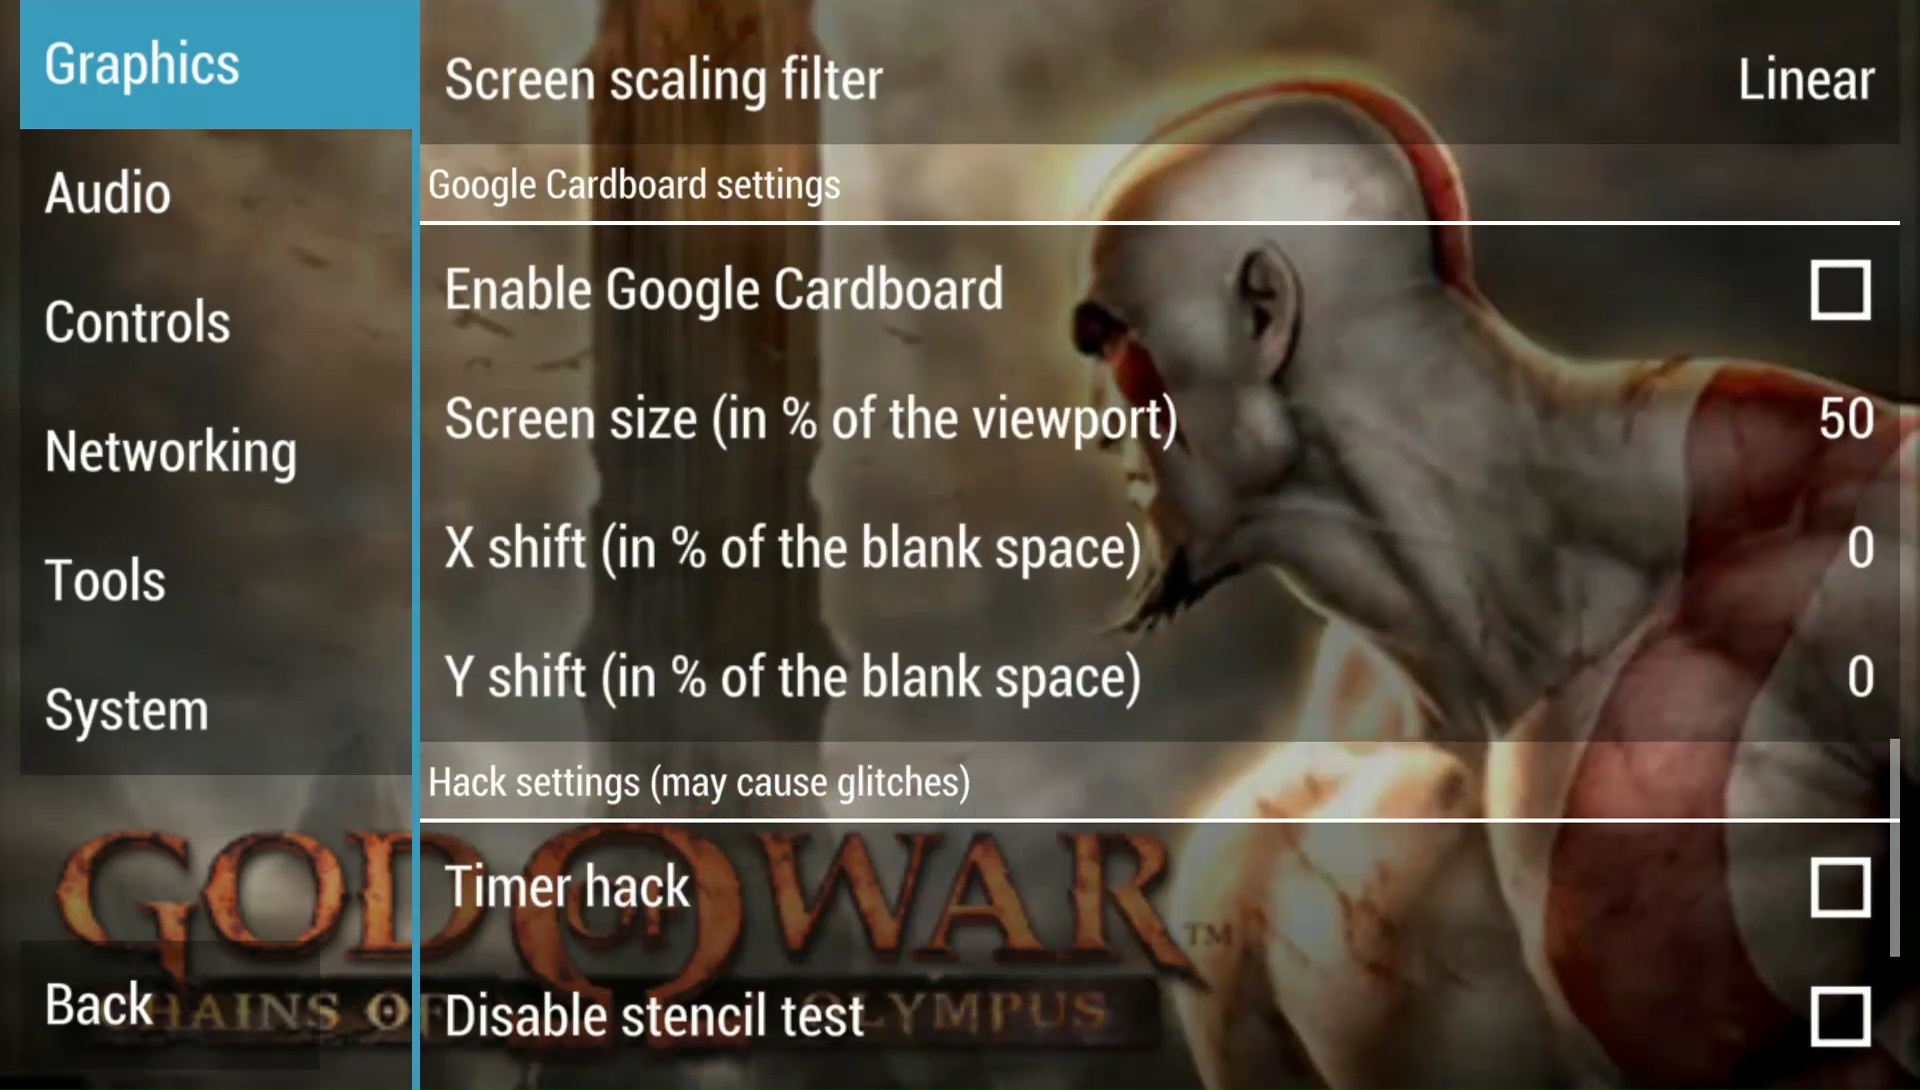 how to Enable Cheats God of War: Chains of Olympus Gameplay On PPSSPP  Emulator Android 